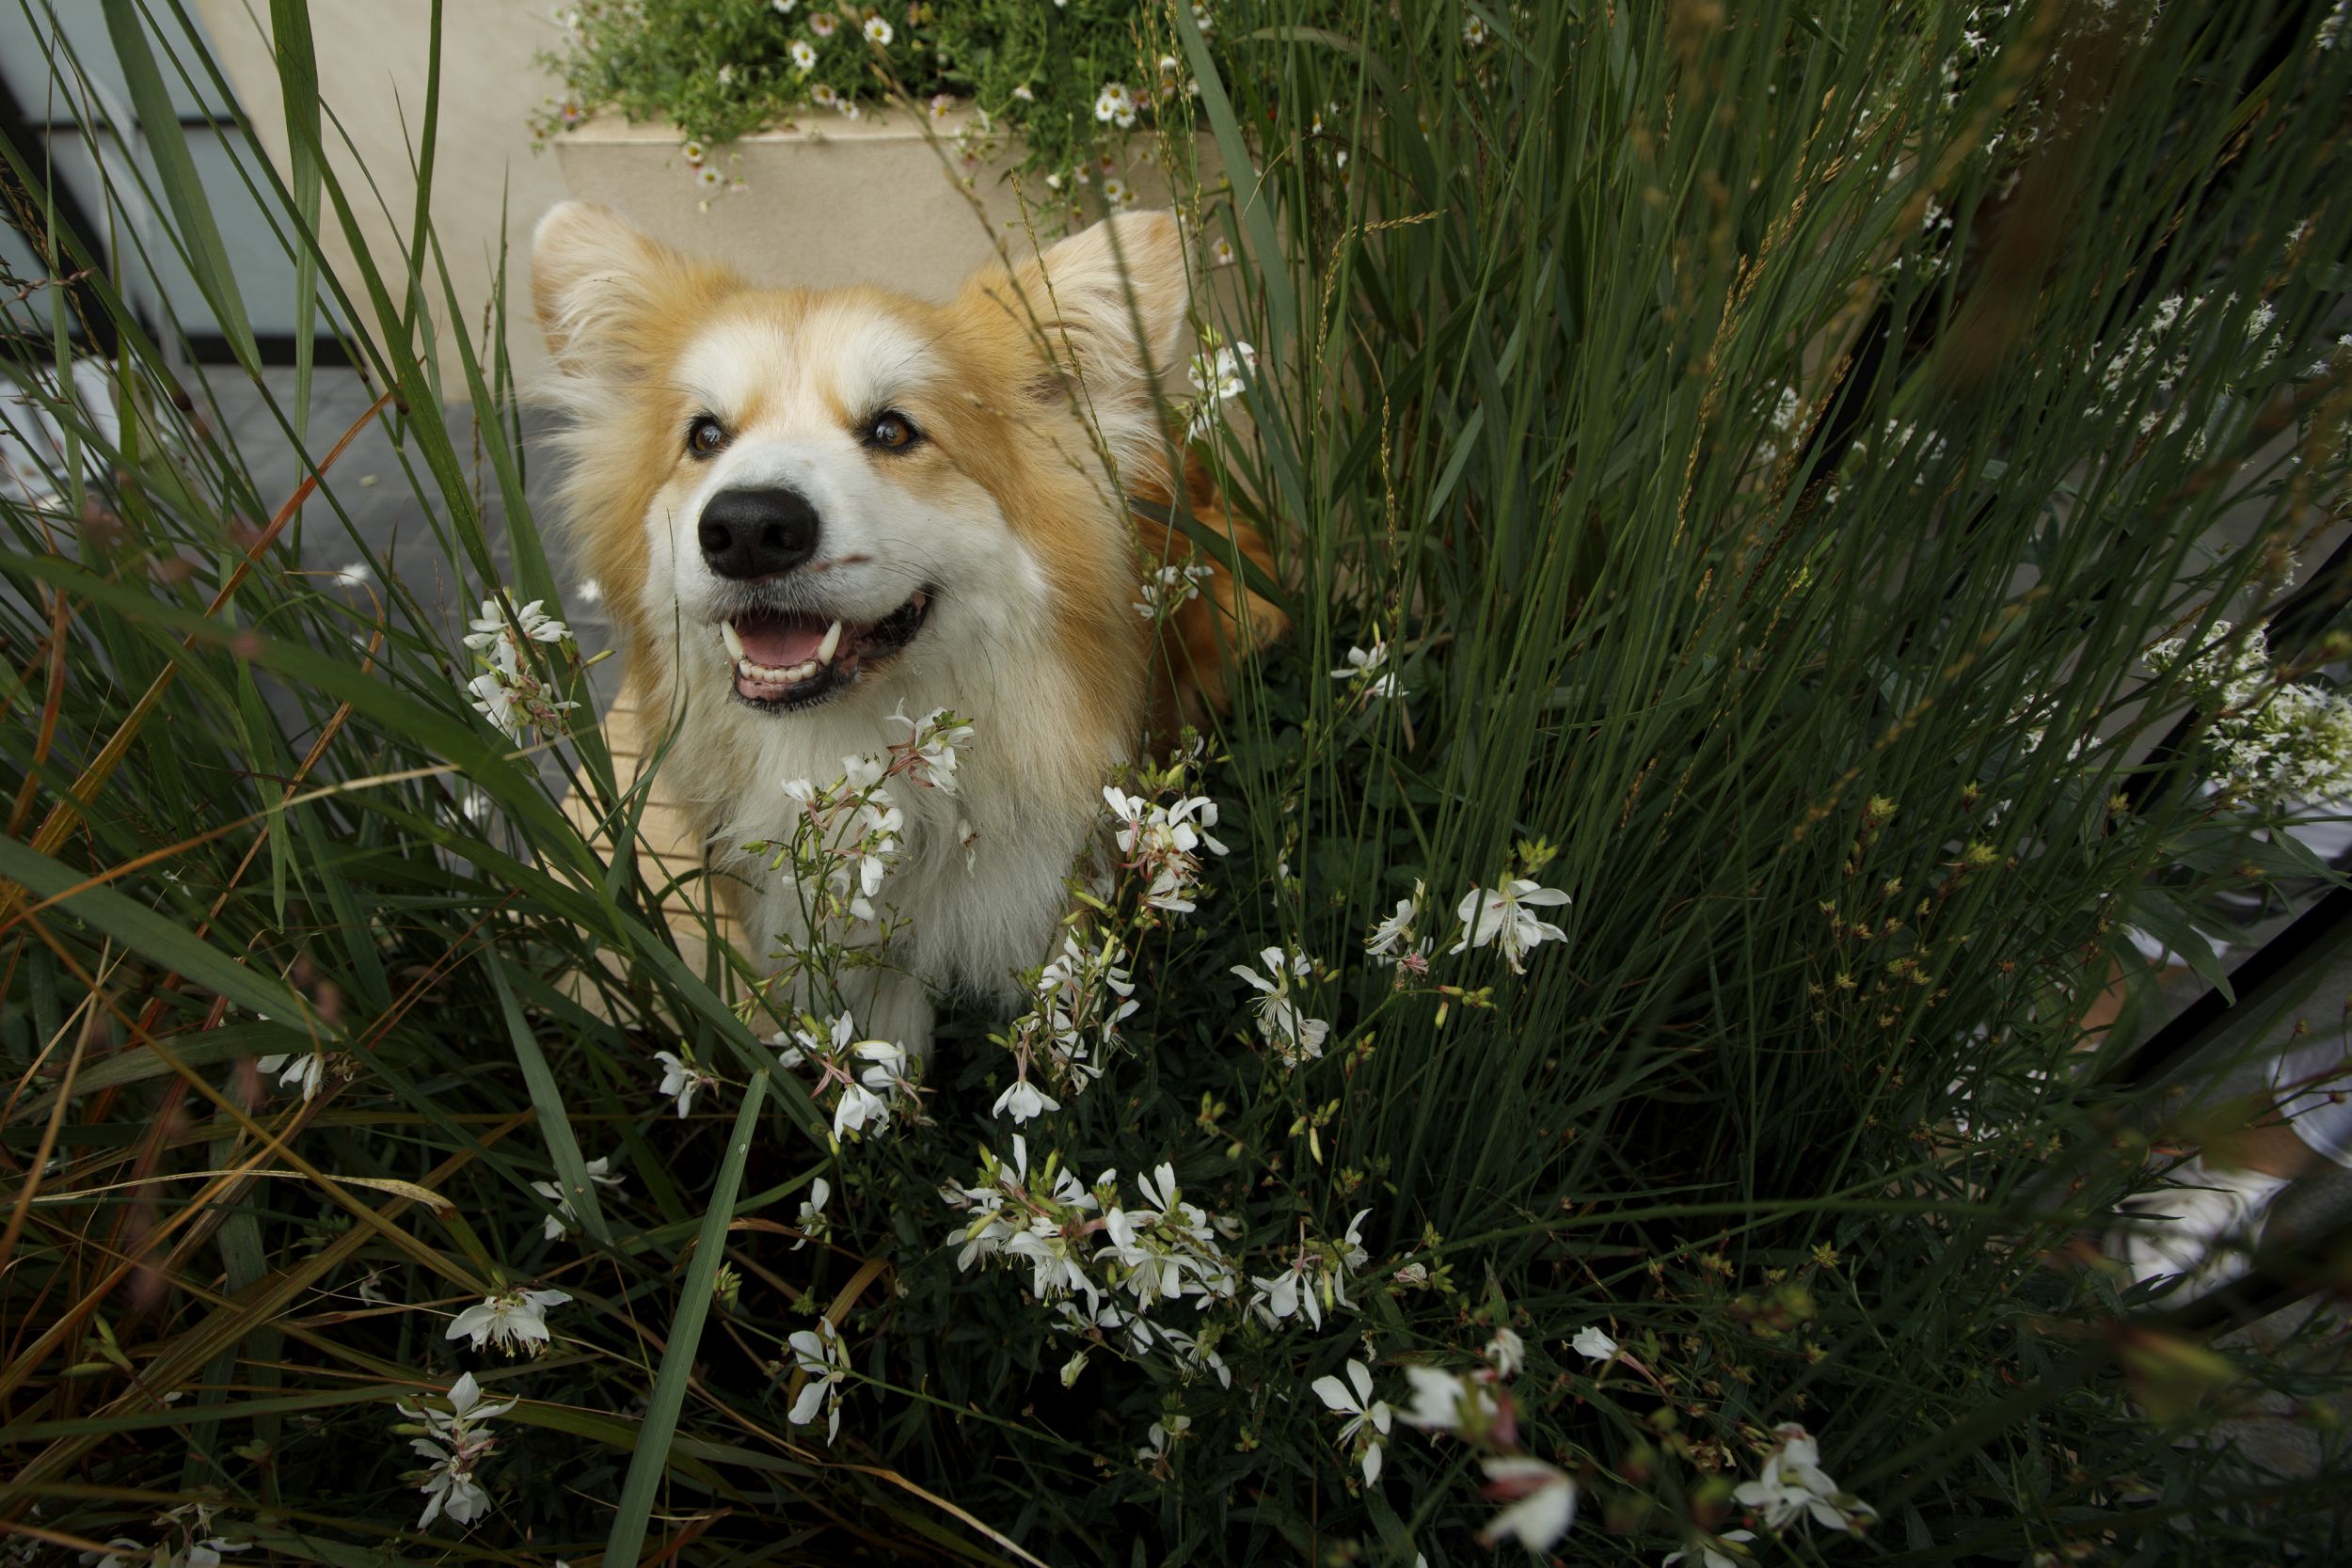  RHS Chelsea Flower Show Sent A Picture of a Corgi in the press package